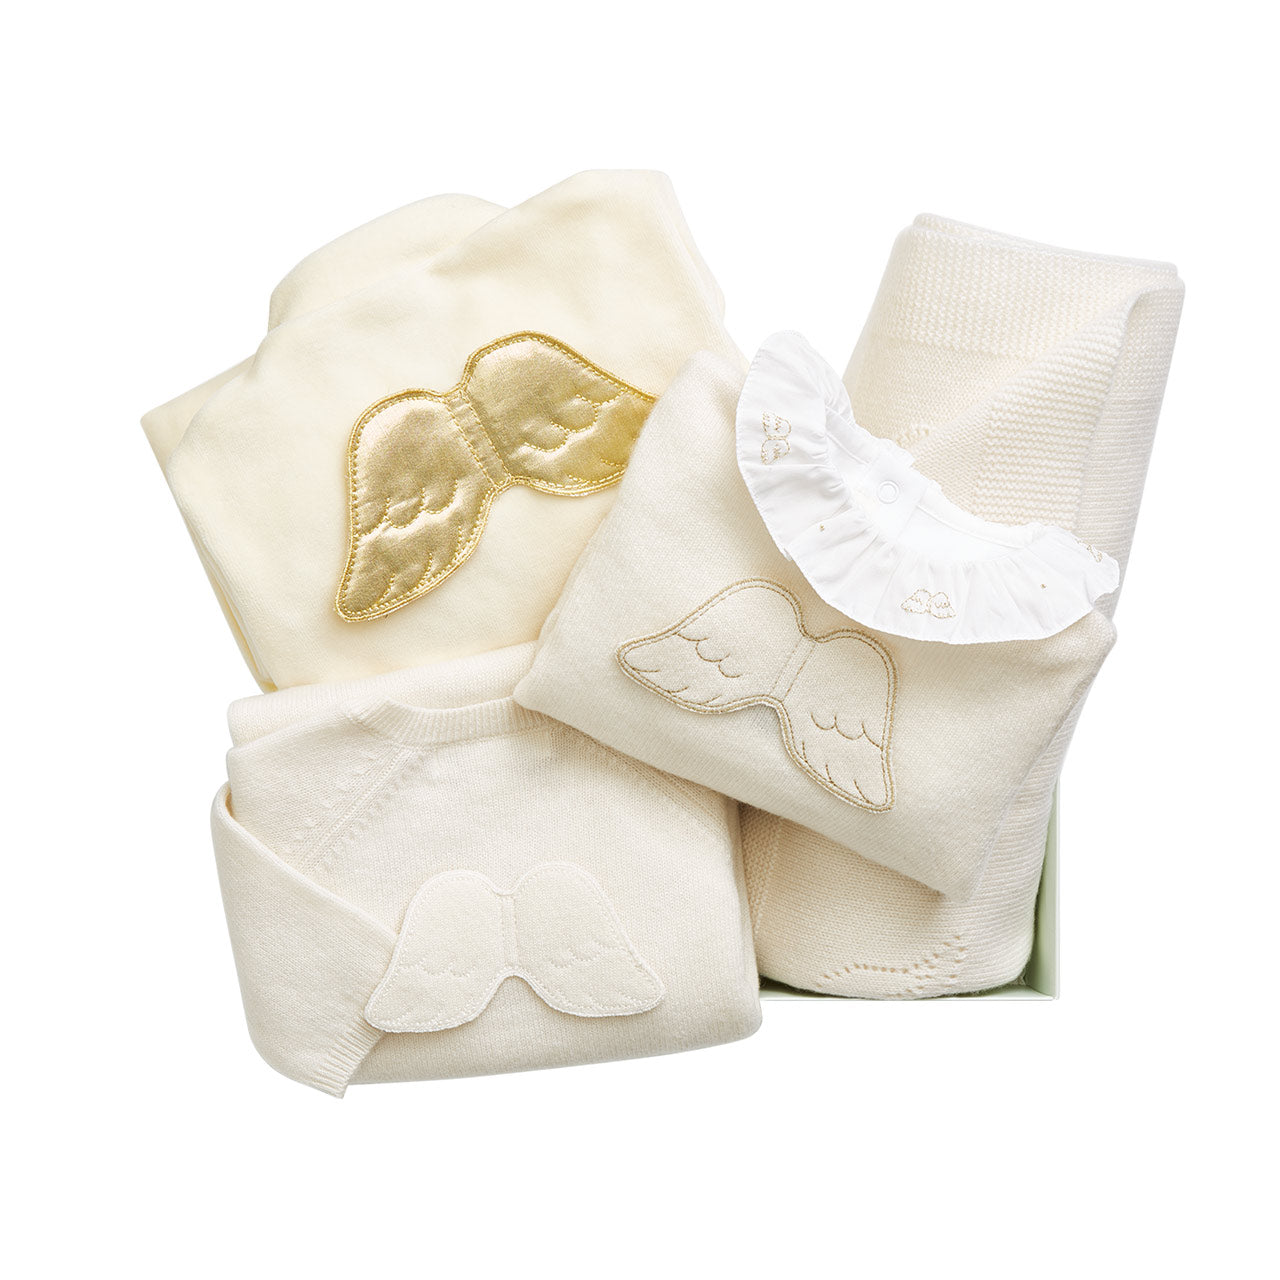 https://bonjourbabybaskets.com/collections/baby-gift-sets-1/products/luxury-angel-wing-cashmere-5-piece-baby-gift-set